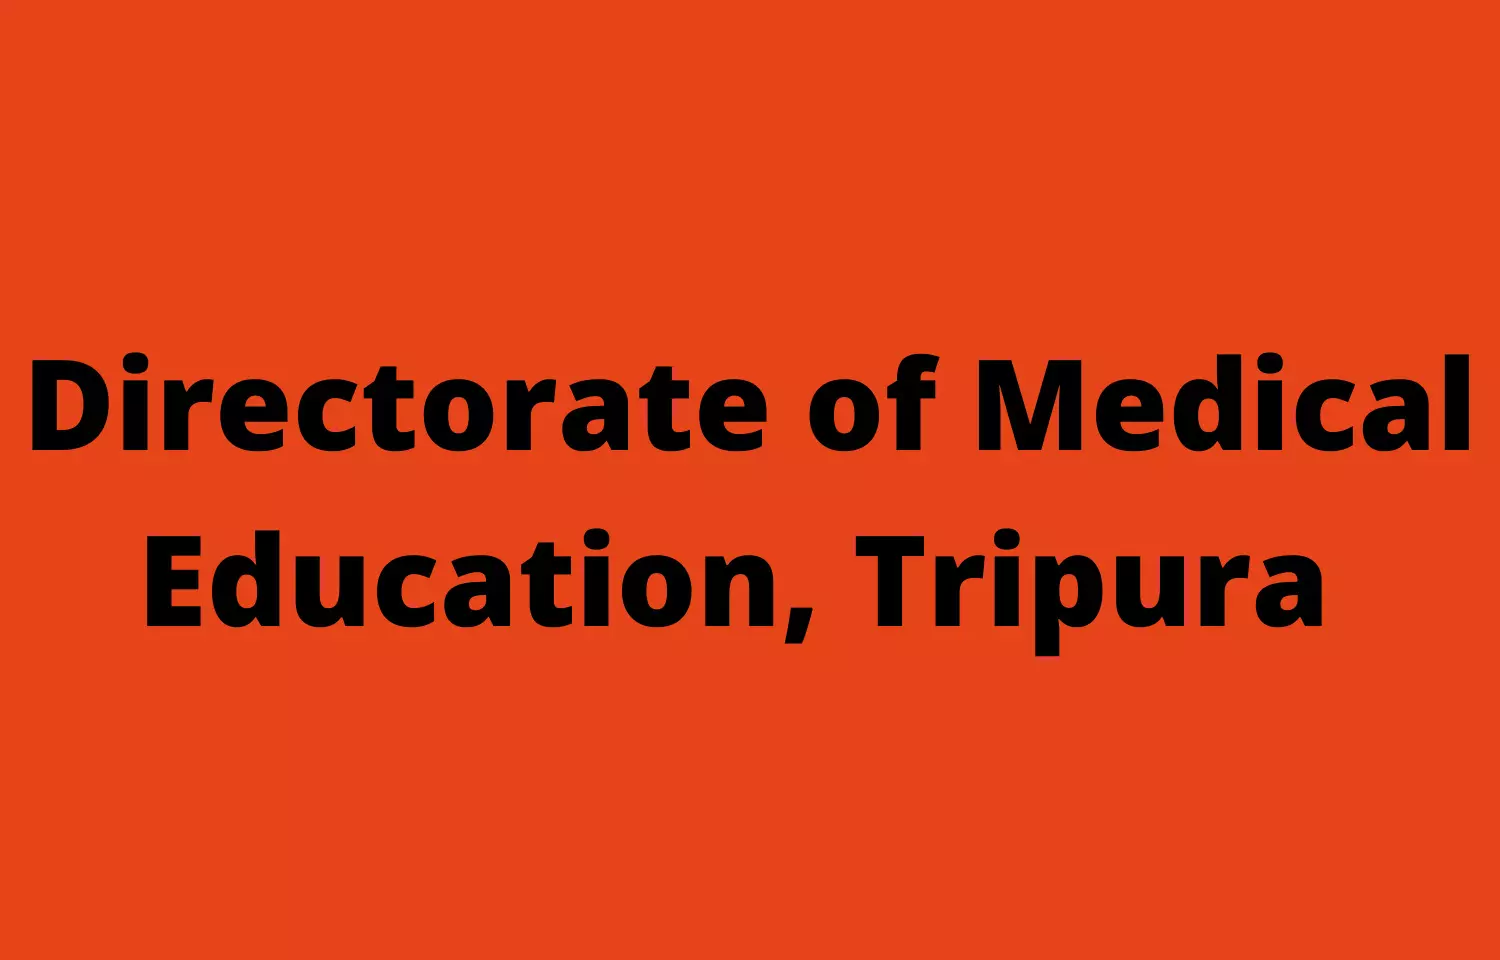 PG Medical Admissions in Tripura: DME releases guidelines for sponsorship, bond requirements by in-service candidates